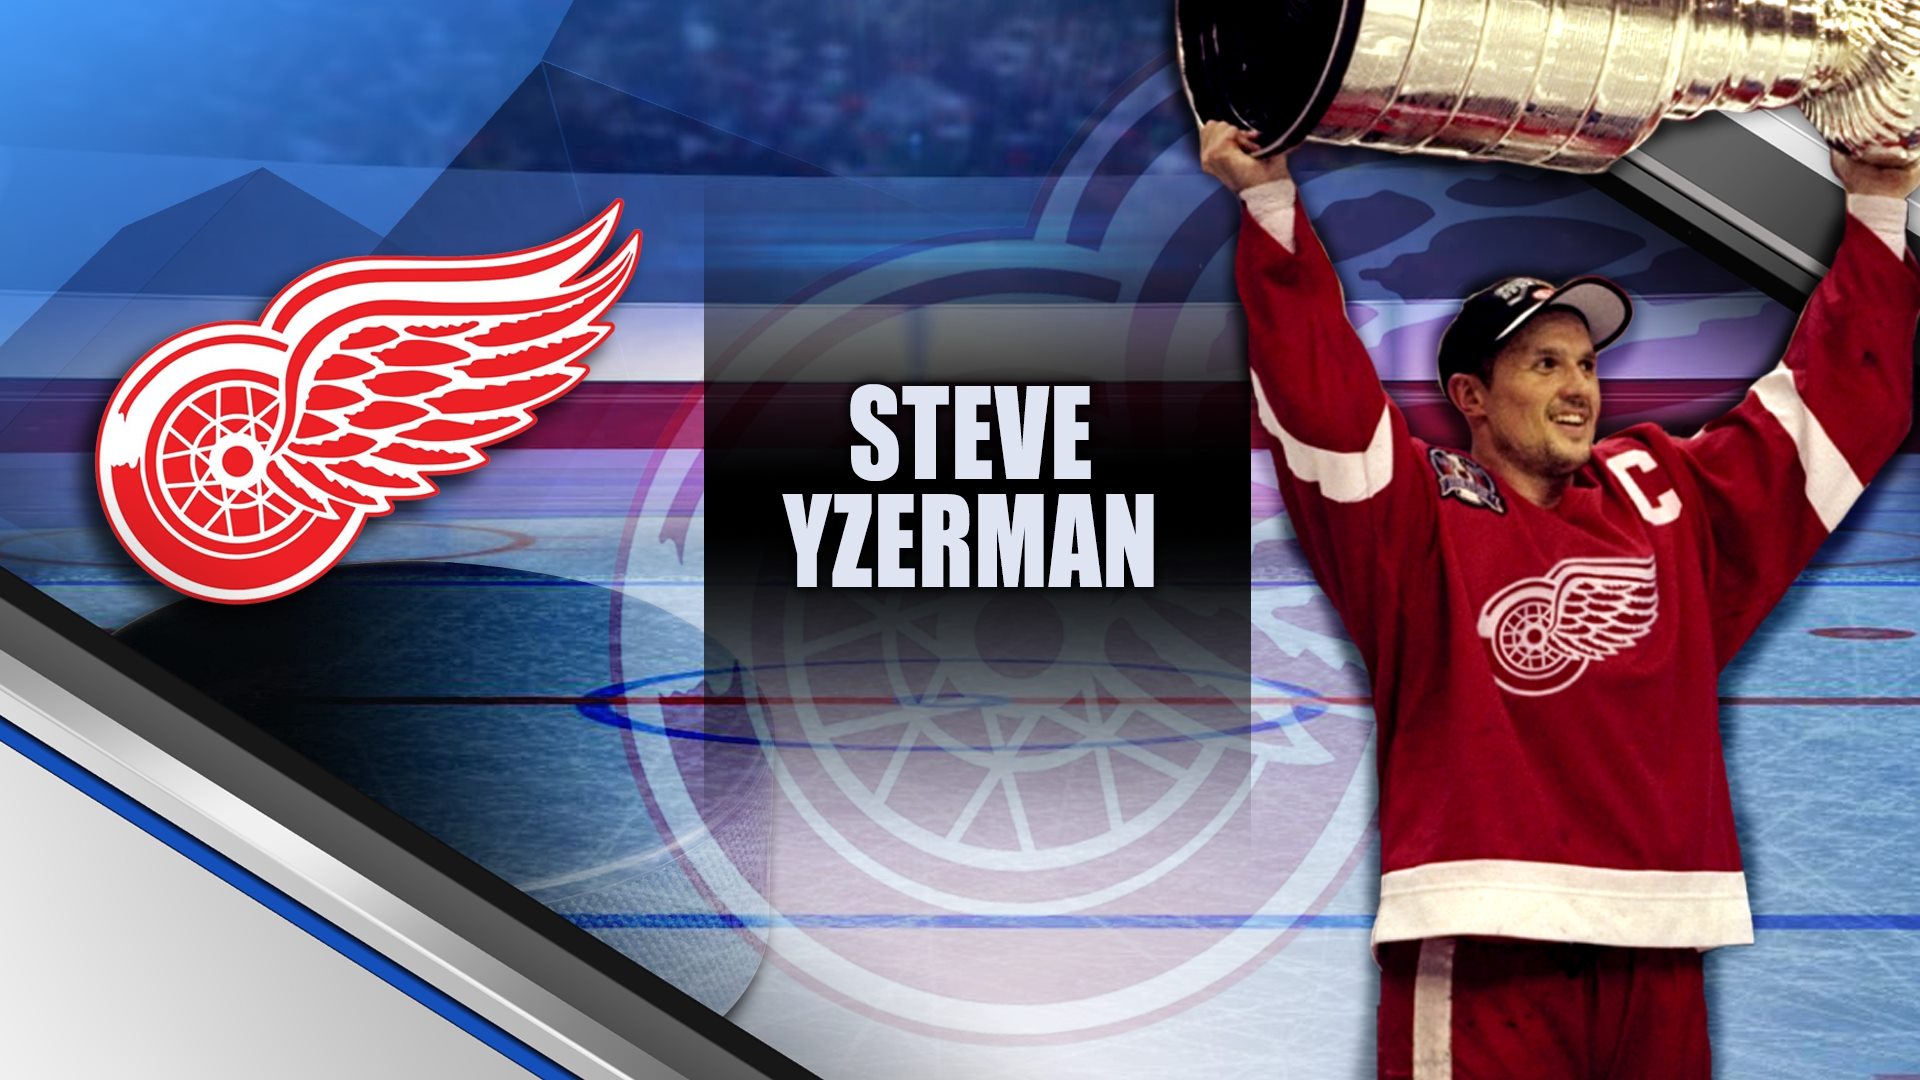 Steve Yzerman's rise up the GM ranks was decades in the making